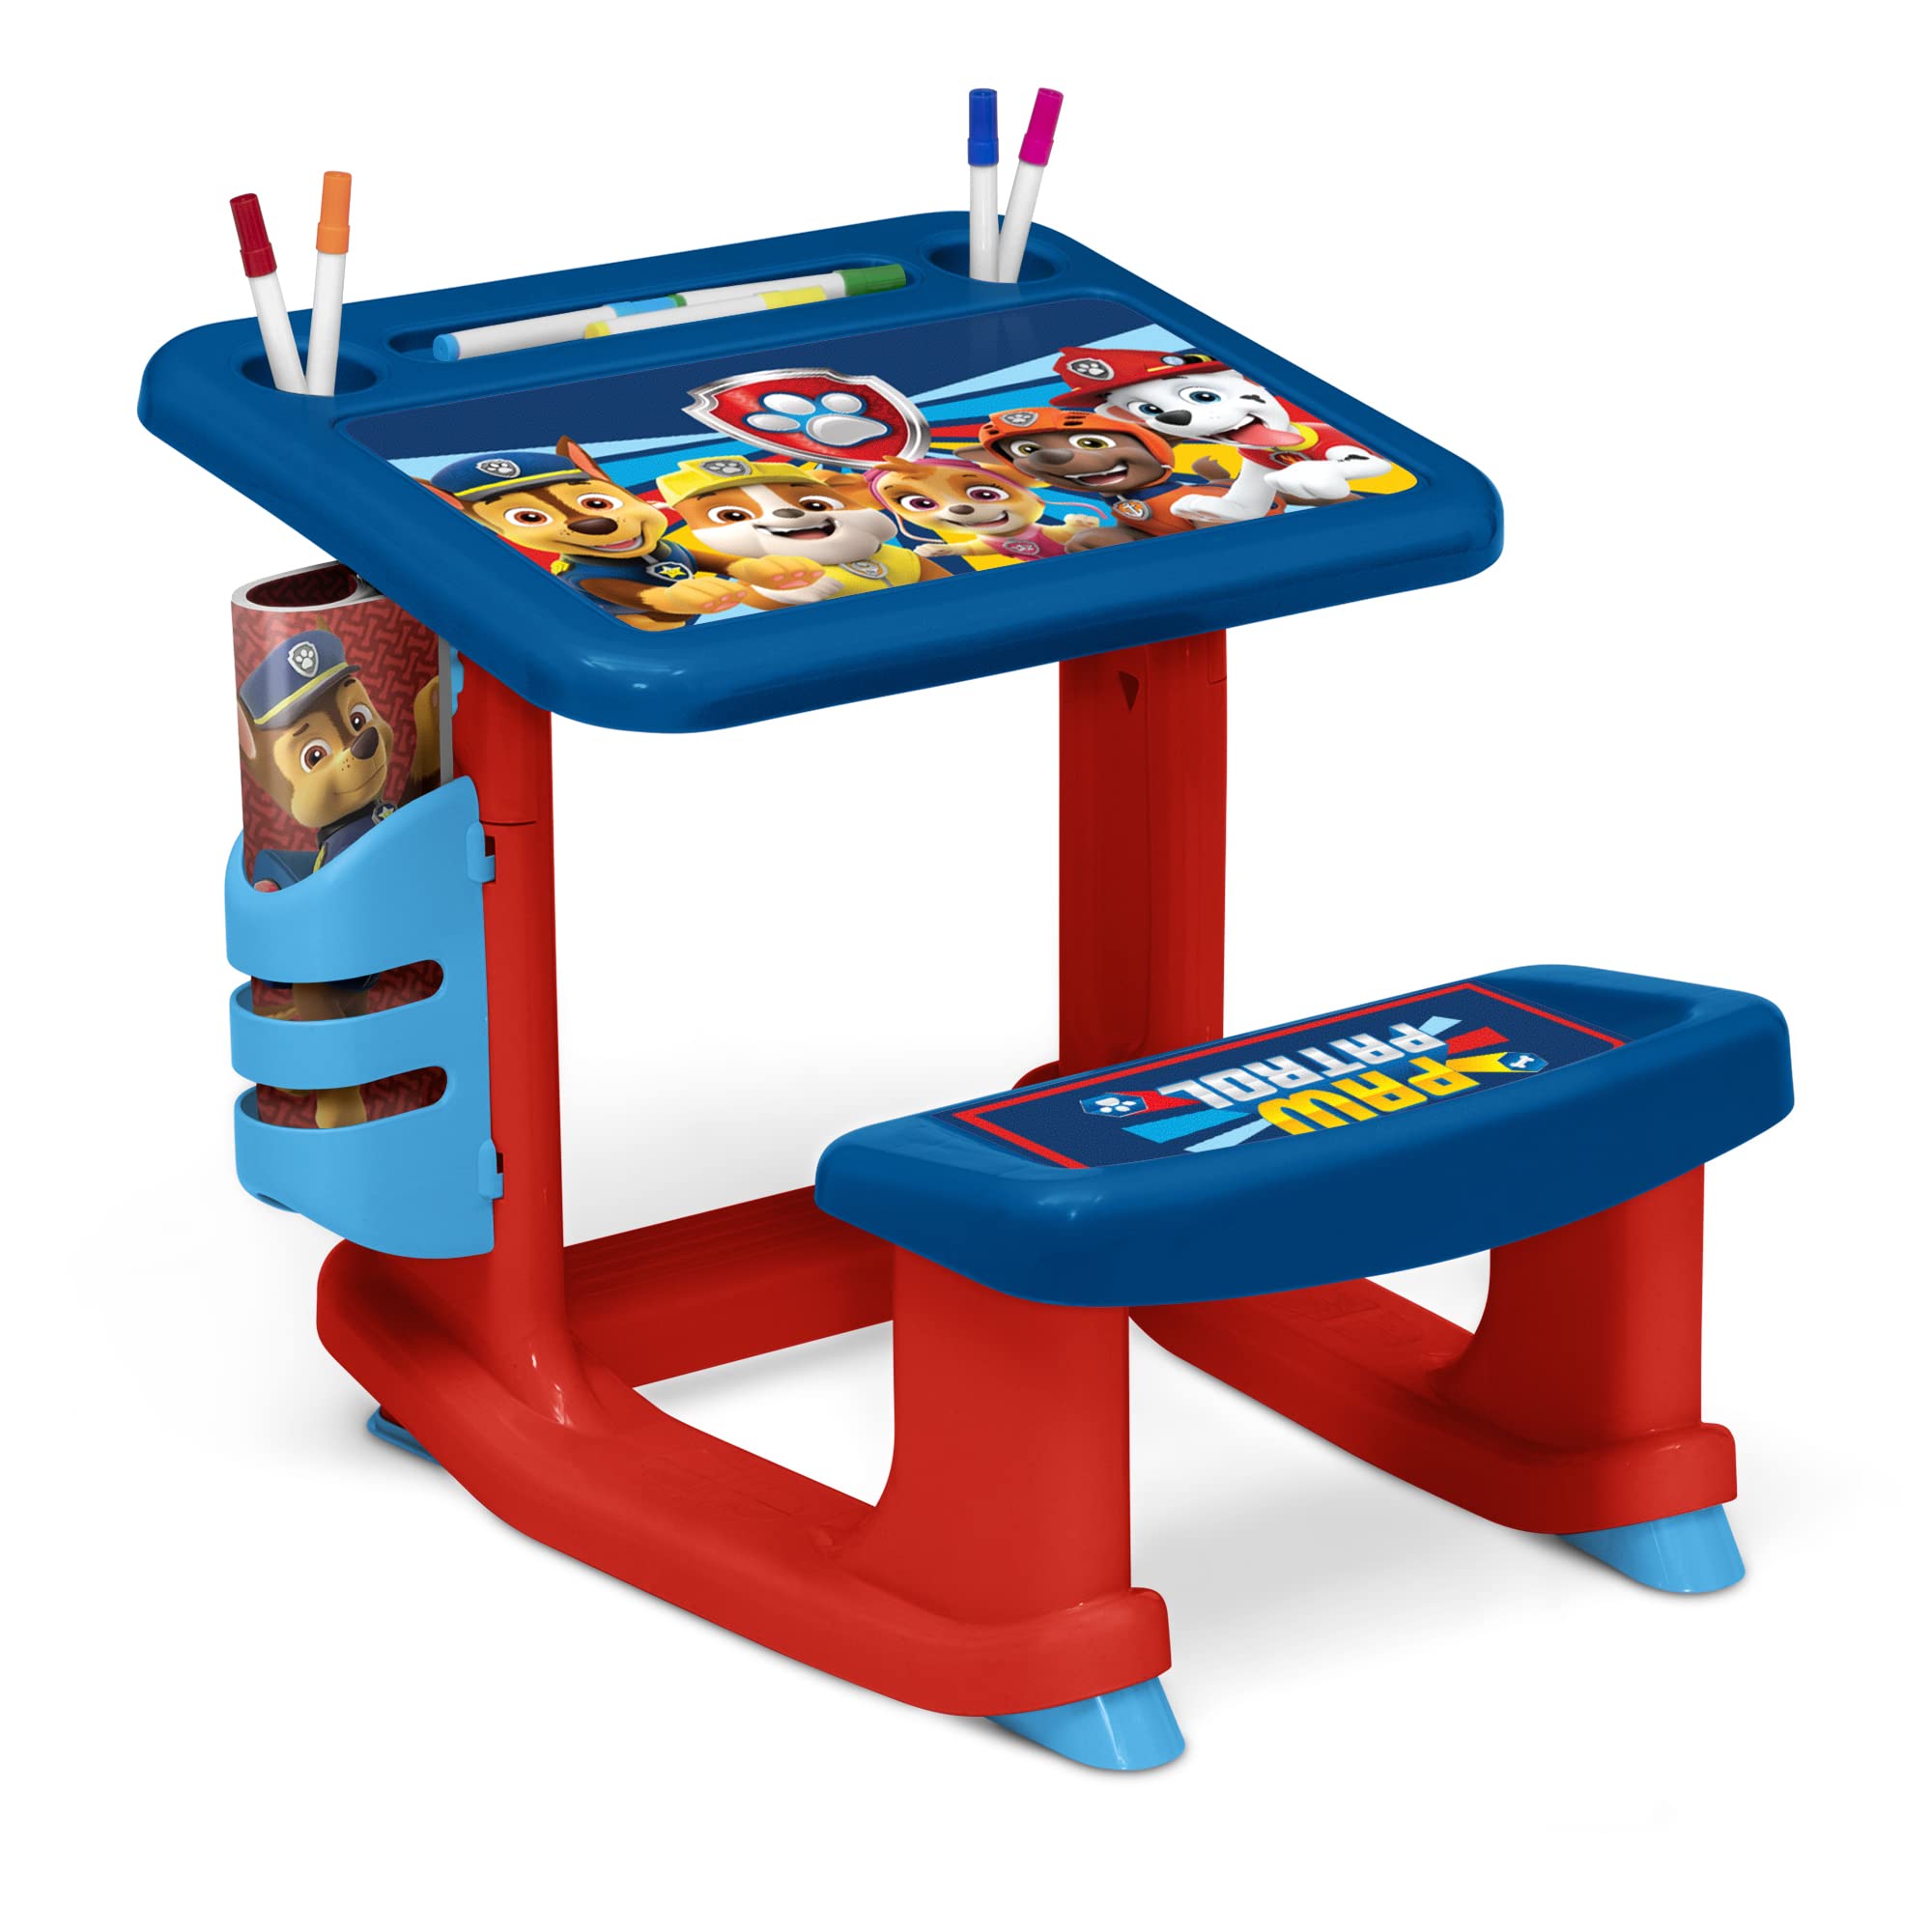 Delta Children Paw Patrol Draw & Play Desk w/ Side compartment, Marker Holder w/ 10 Markers & Coloring Book (Blue) $35.75 + Free Shipping